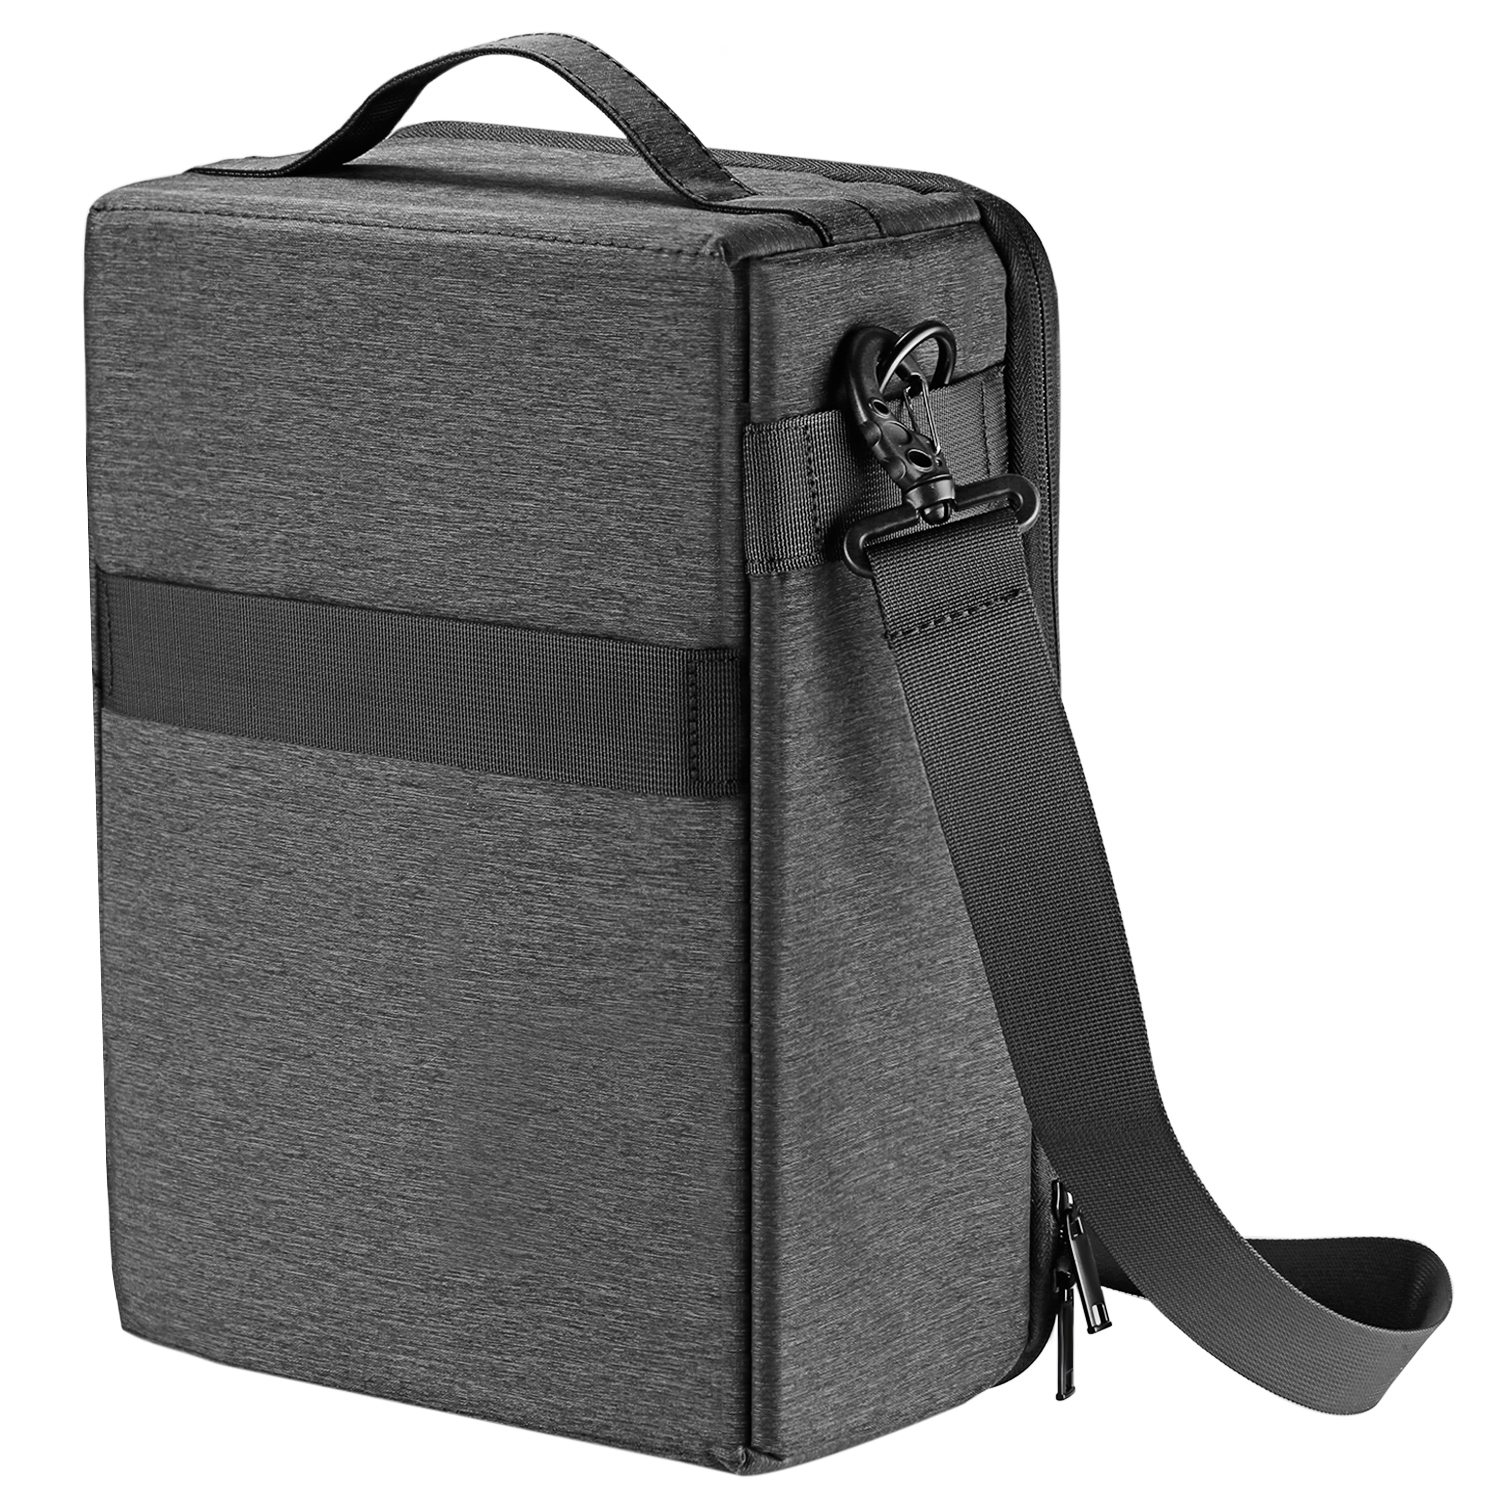 Neewer NW140S Waterproof Camera and Lens Storage Carrying Case Soft ...